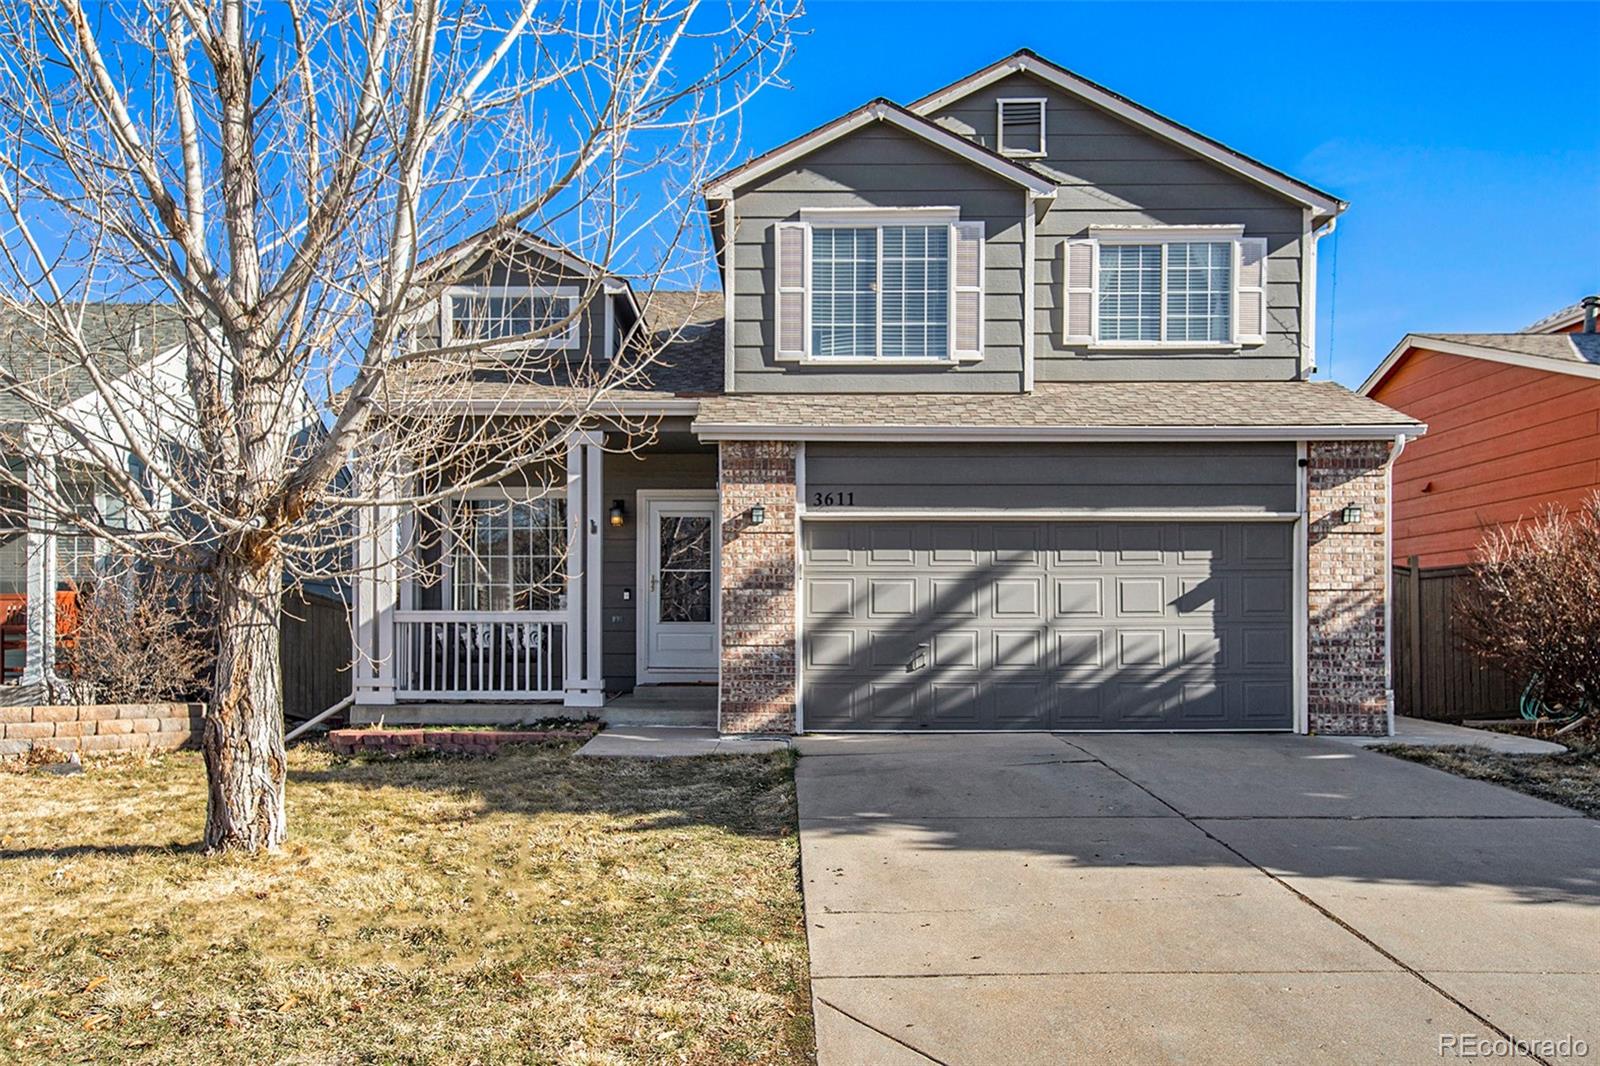 Report Image for 3611  Morning Glory Drive,Castle Rock, Colorado